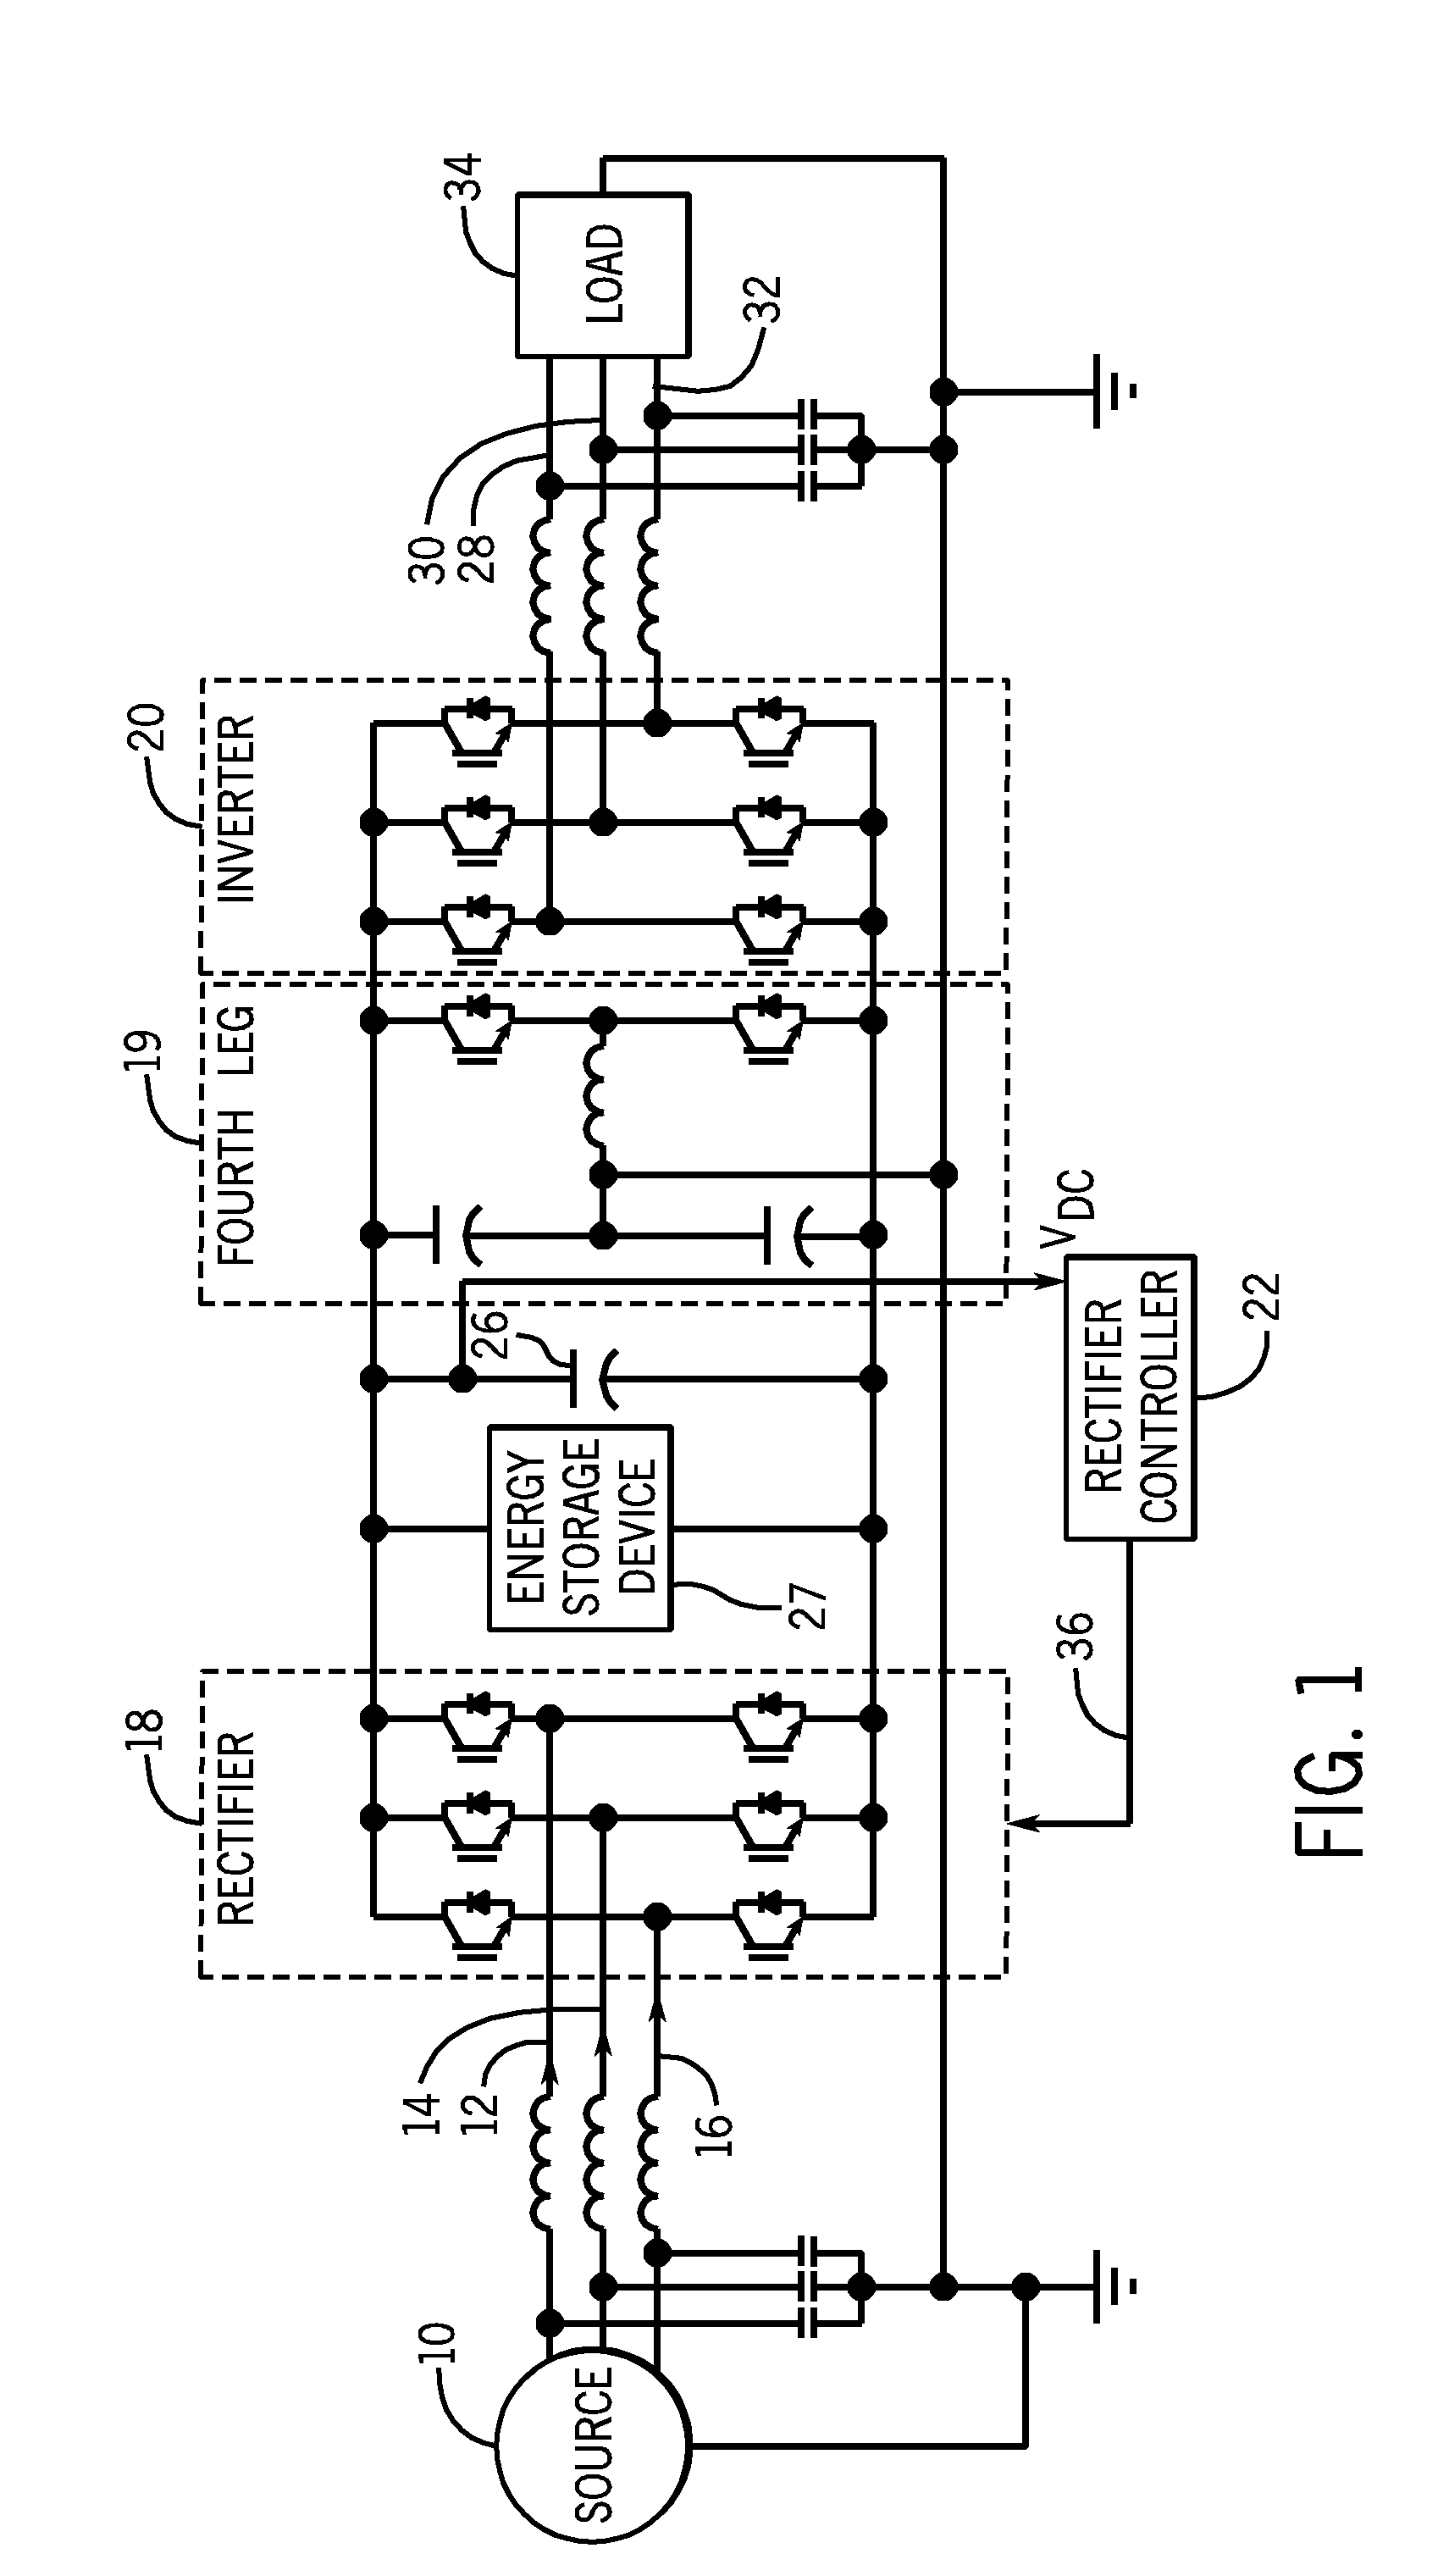 Systems and Methods for Balancing UPS Source Currents During Unbalanced Load Transient Conditions